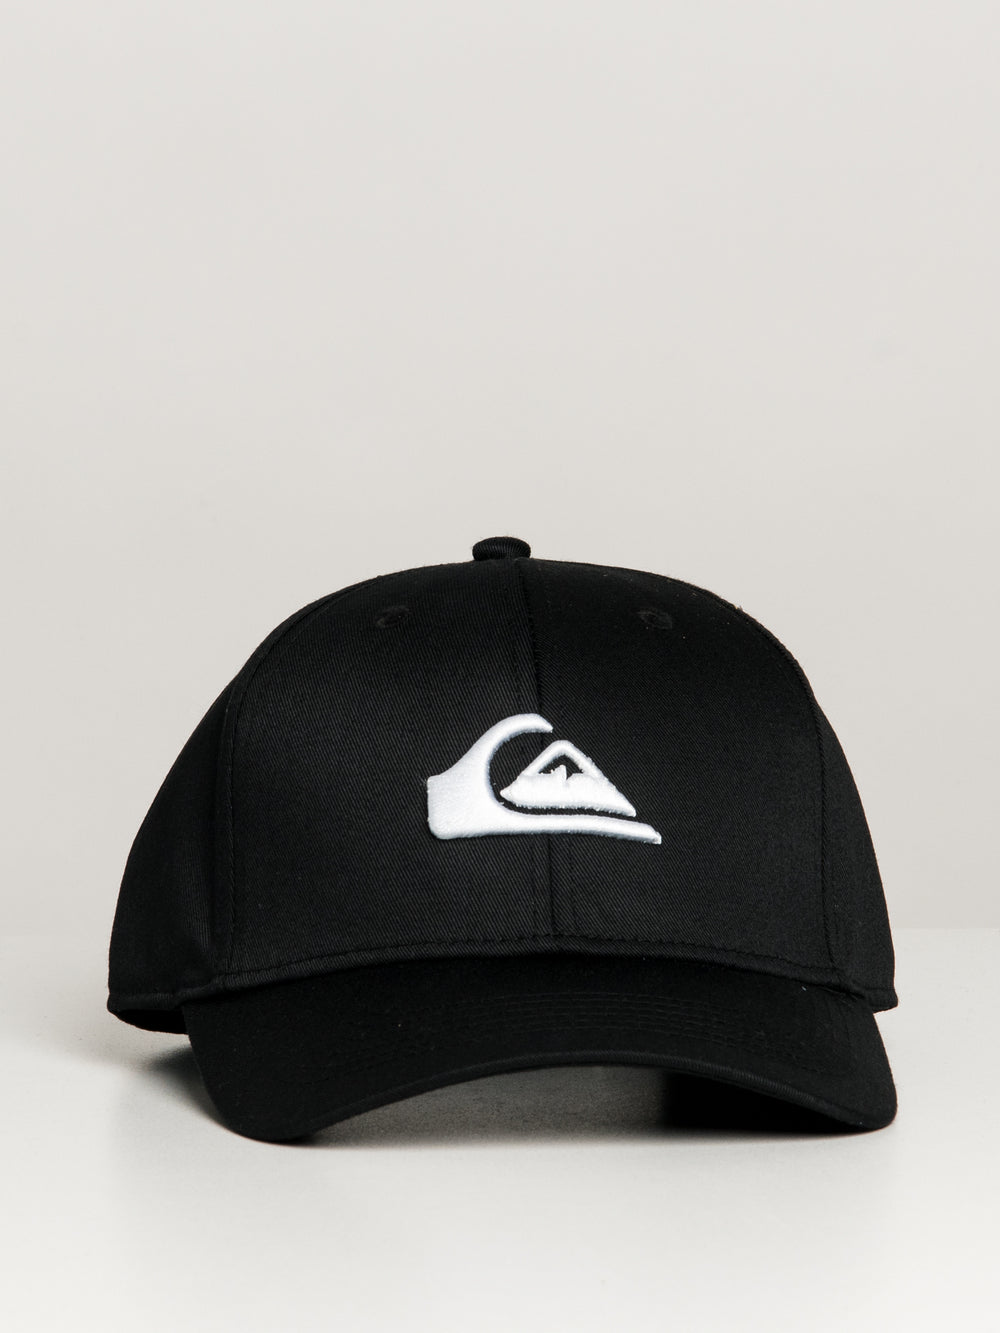 YOUTH QUIKSILVER DECADES HAT - CLEARANCE